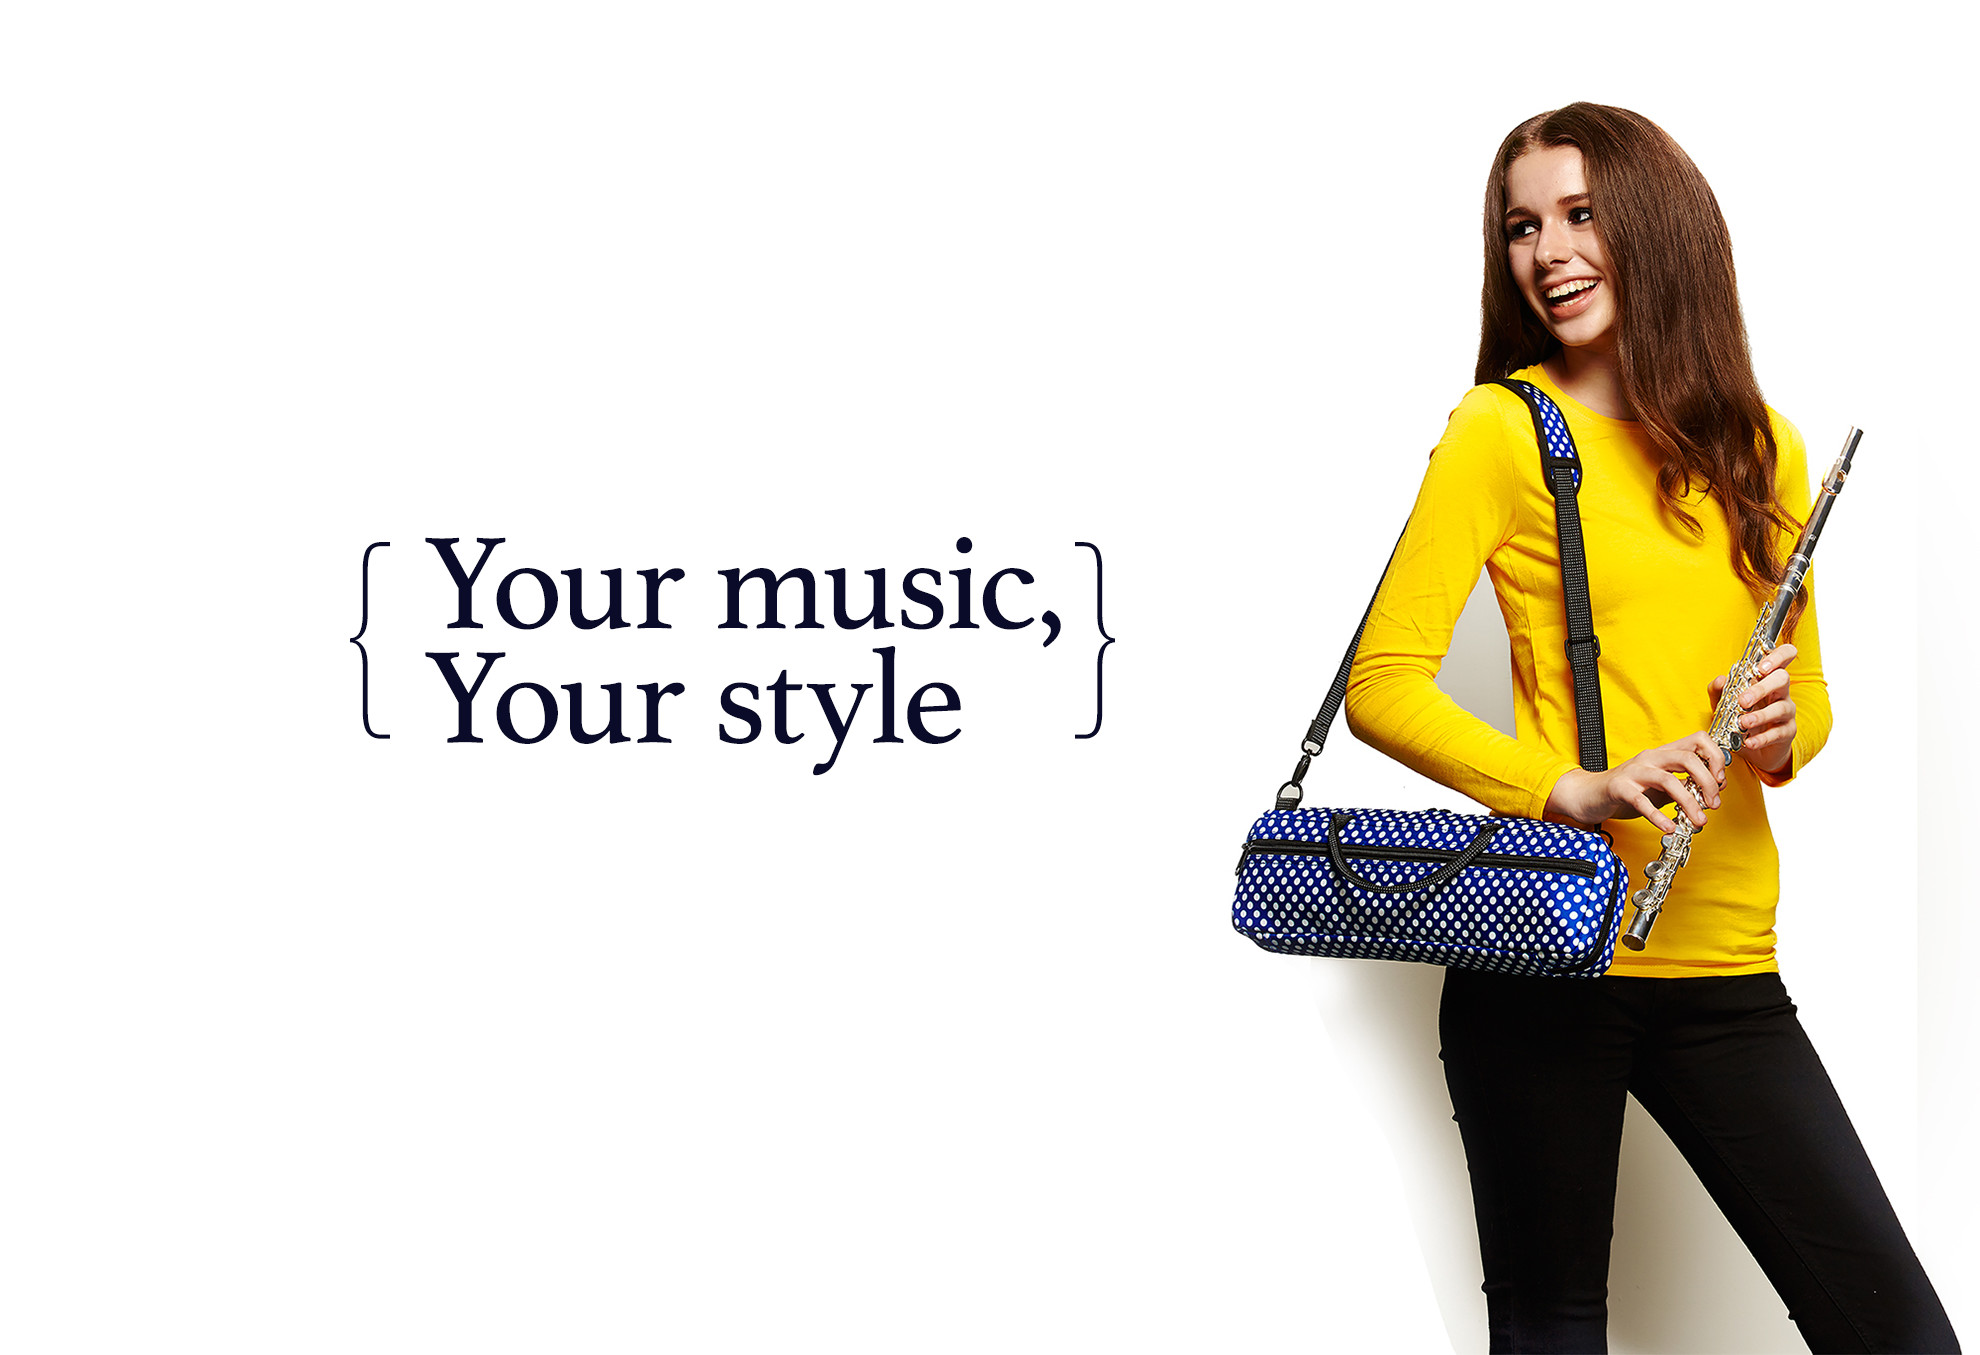 Your music, Your style